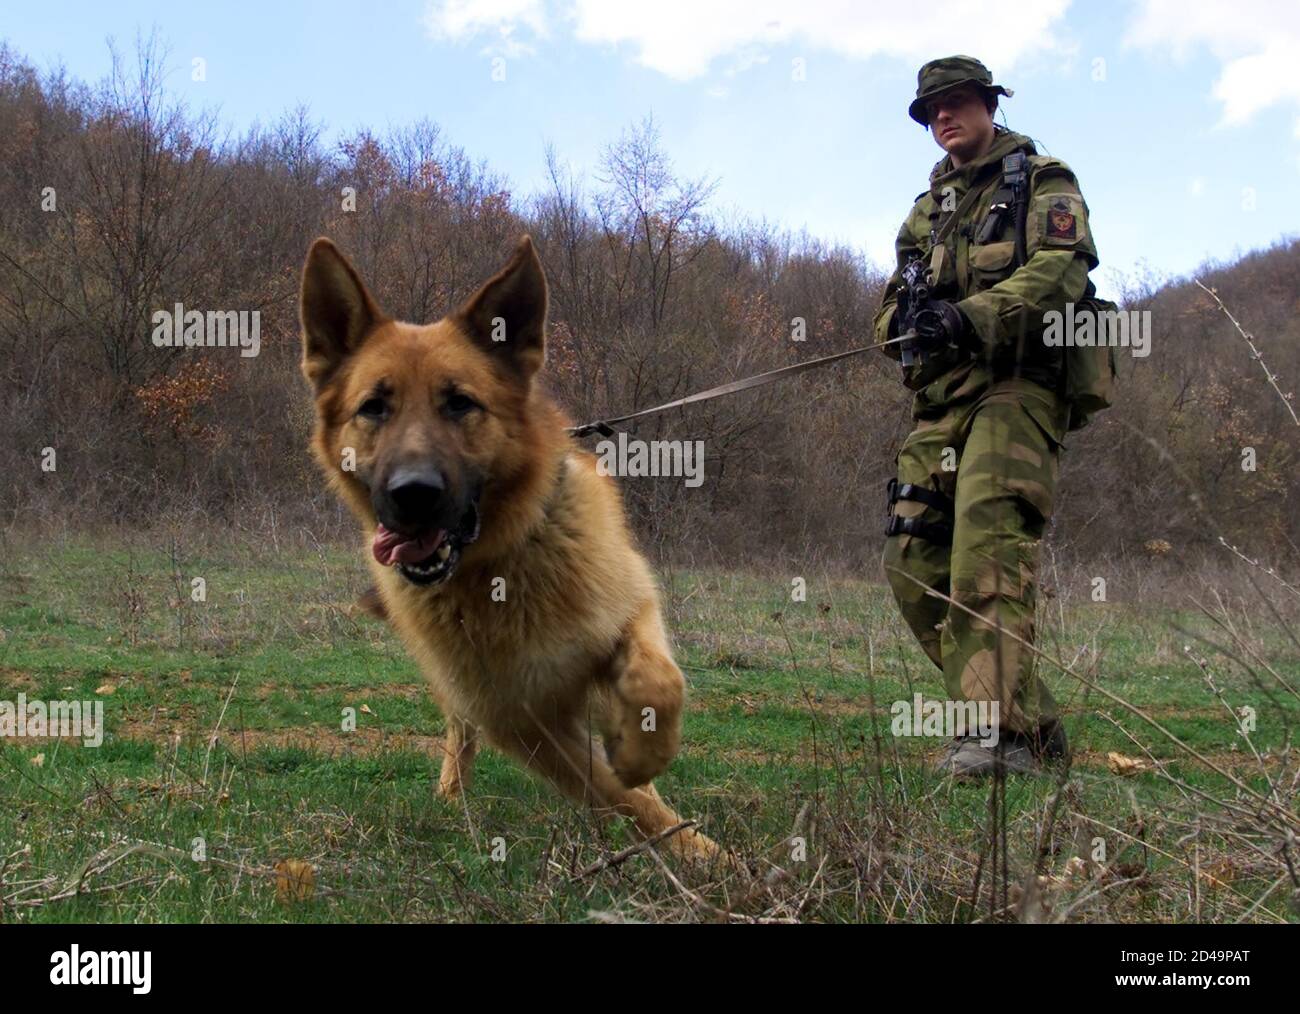 A Norwegian KFOR soldier patrols with a special trained German Shepherd dog  in the mountains near the border between Kosovo and Macedonia, nicknamed  "The Chicken Leg", southeast Kosovo. NATO was sending more